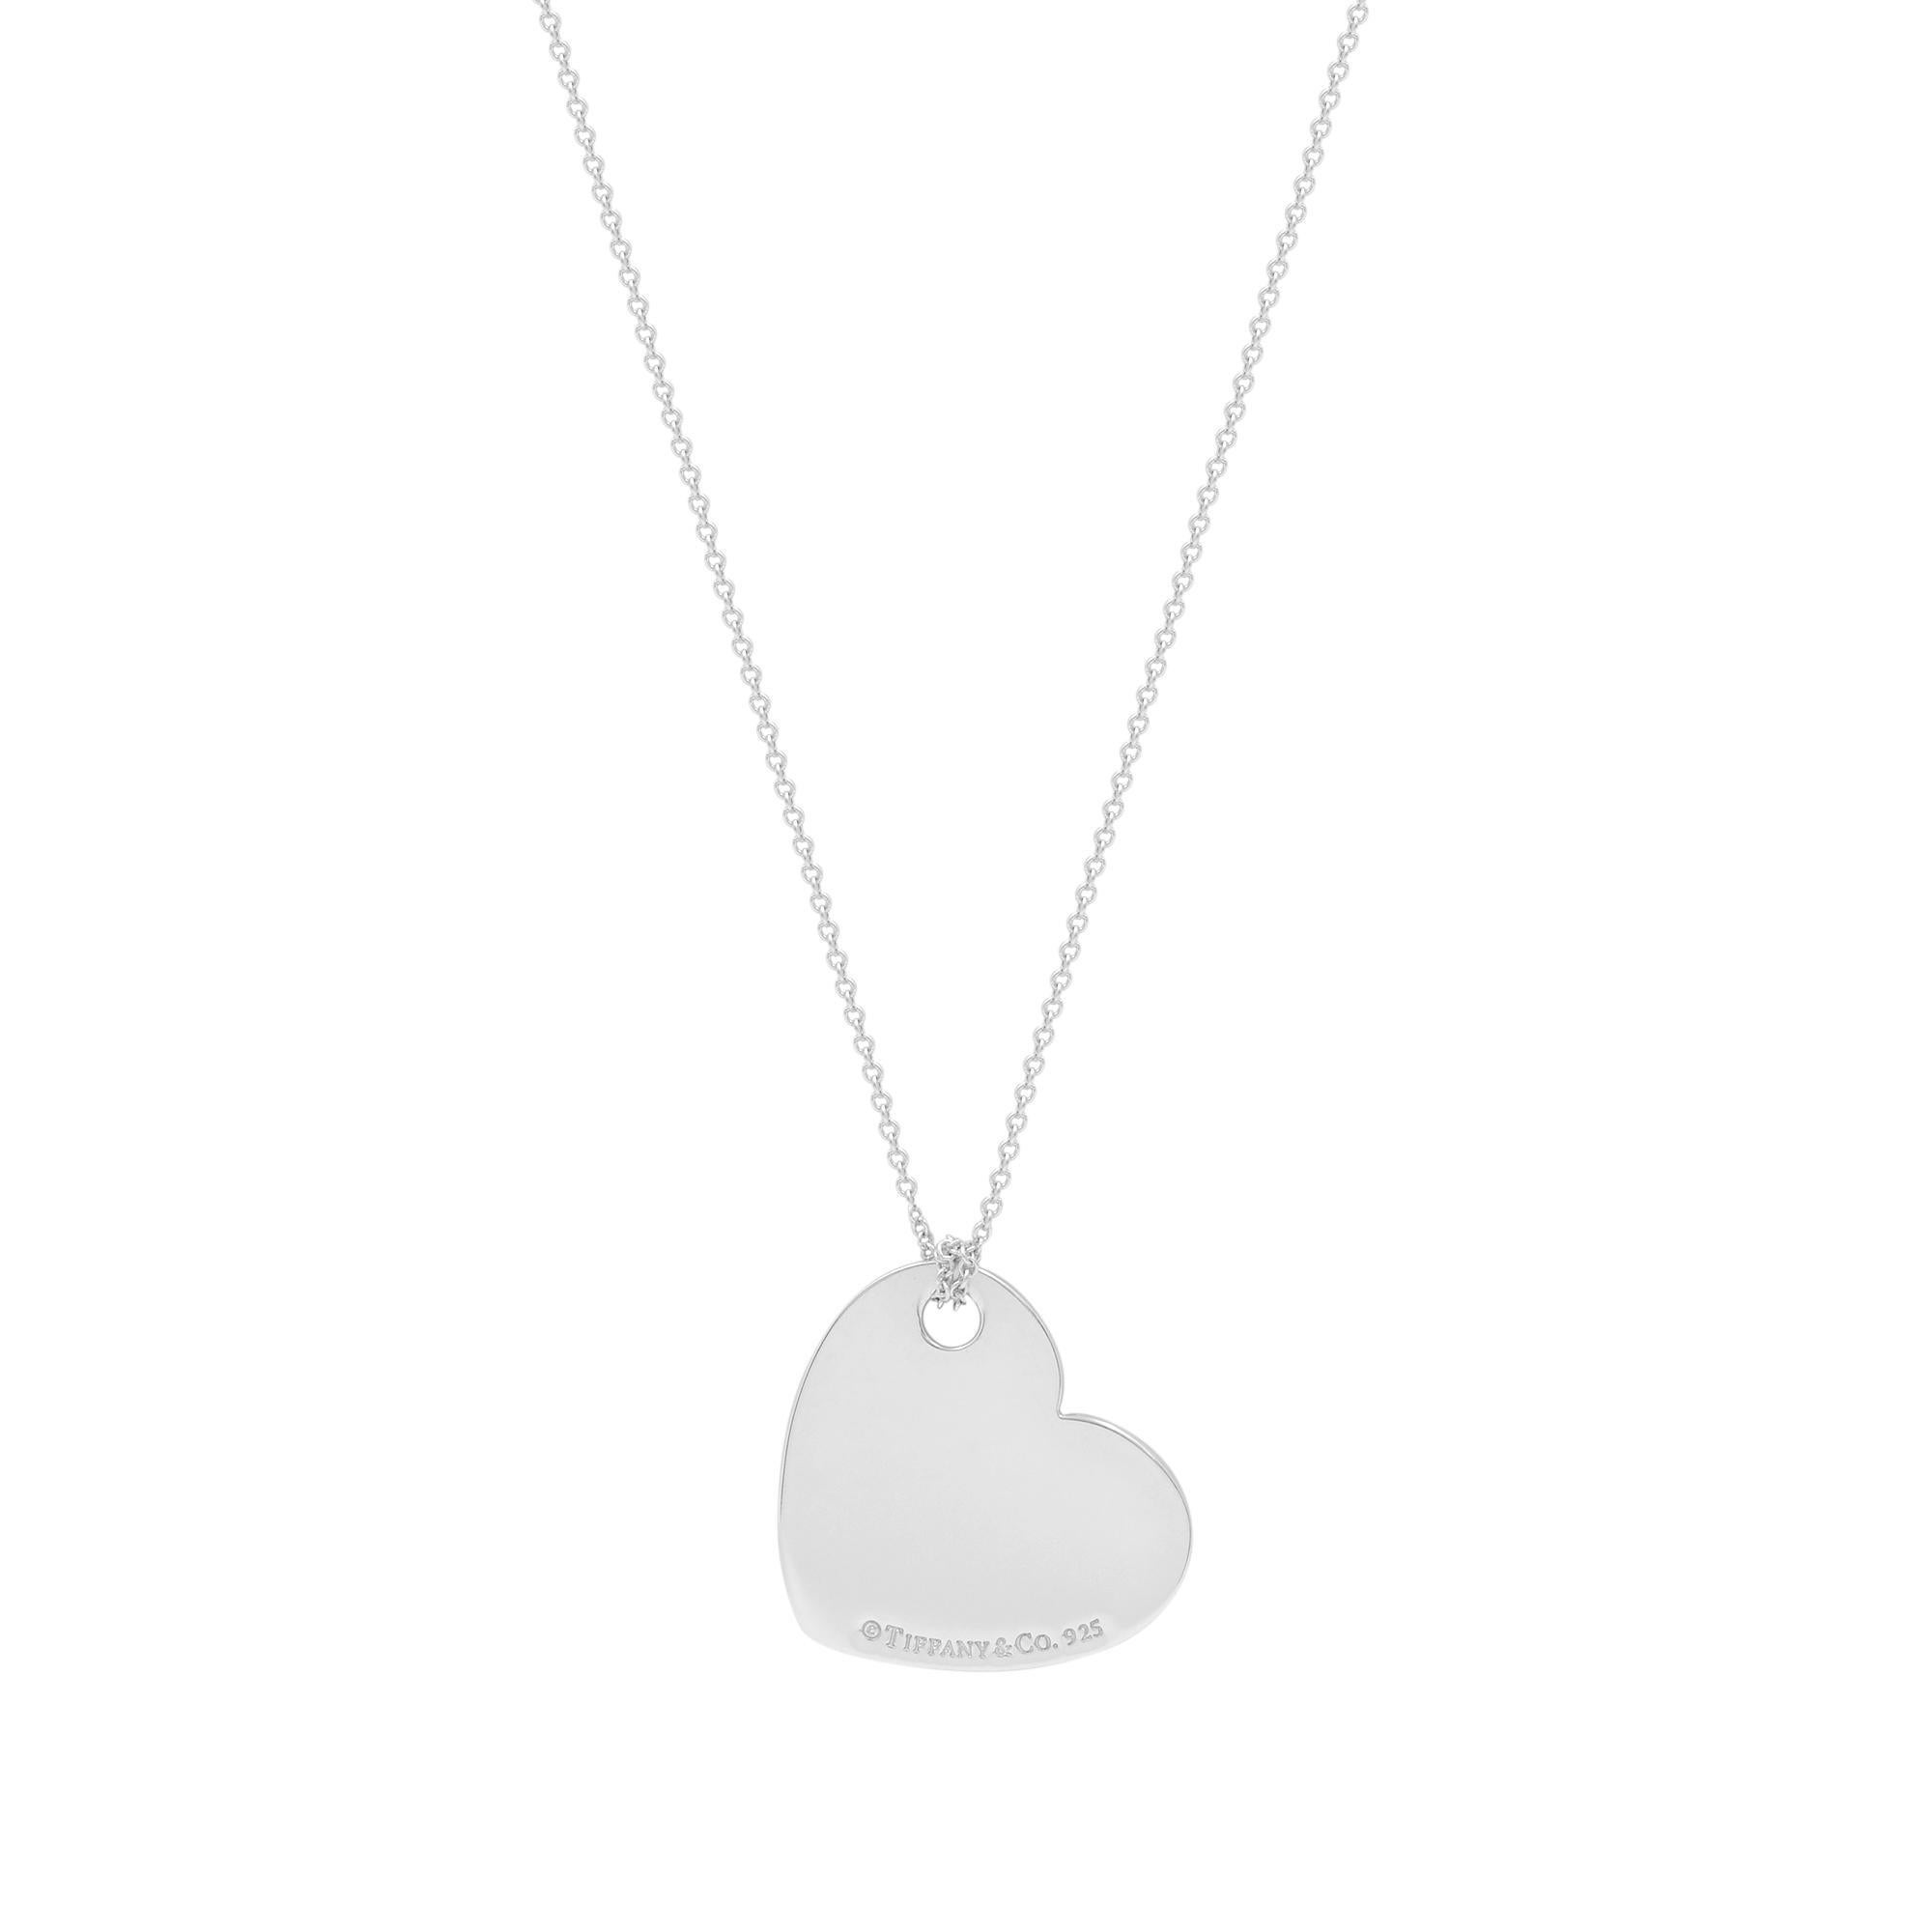 Simple yet elegant the Return to Tiffany heart pendant necklace designed in sterling silver 925. This corner hanging heart tag pendant comes with engraving on the front and stamped on the back. Necklace length: 15 Inches. Pendant Size: 23.8mm x